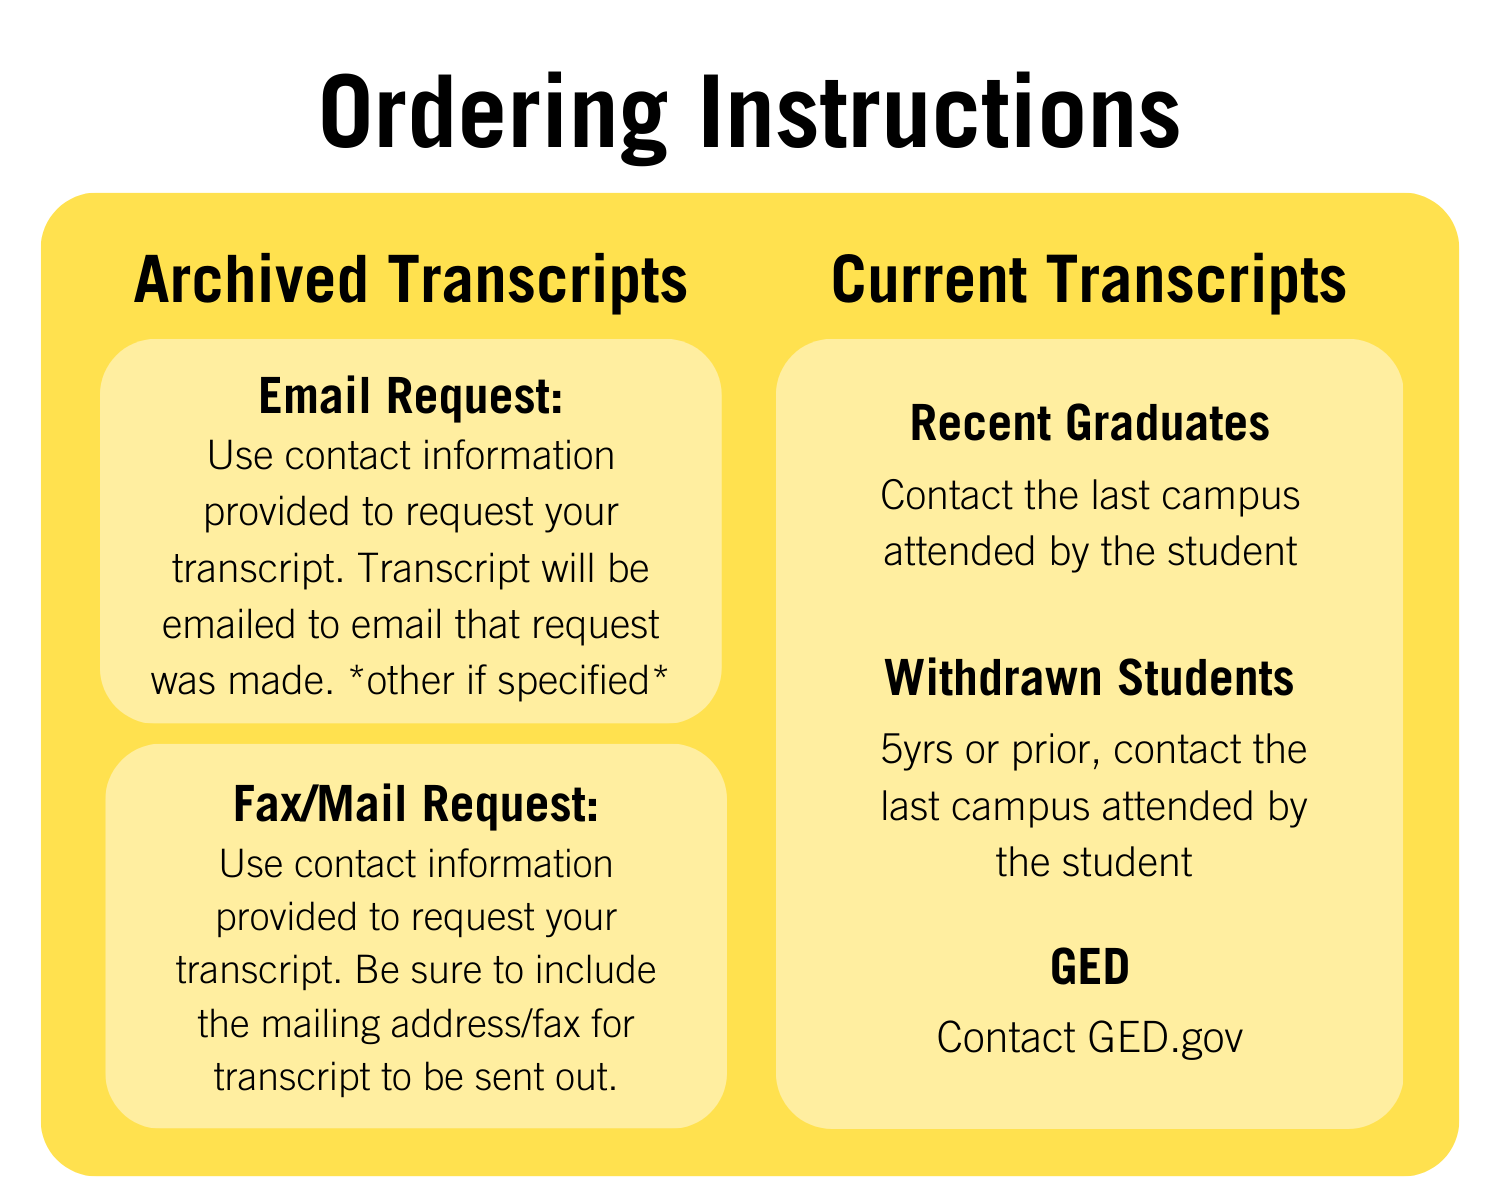 Ordering Instructions: Archived Transcripts (dated 5yrs or older) Email Request: Use contact information provided to request your transcript. Transcript will be emailed to email that request was made. *other if specified* Fax/Mail Request: Use contact information provided to request your transcript. Be sure to include the address for transcript to be sent out. Recent Transcripts (dated less than 5yrs) Dated less than 5 years. Contact the last campus attended by the student. GED Contact GED.gov